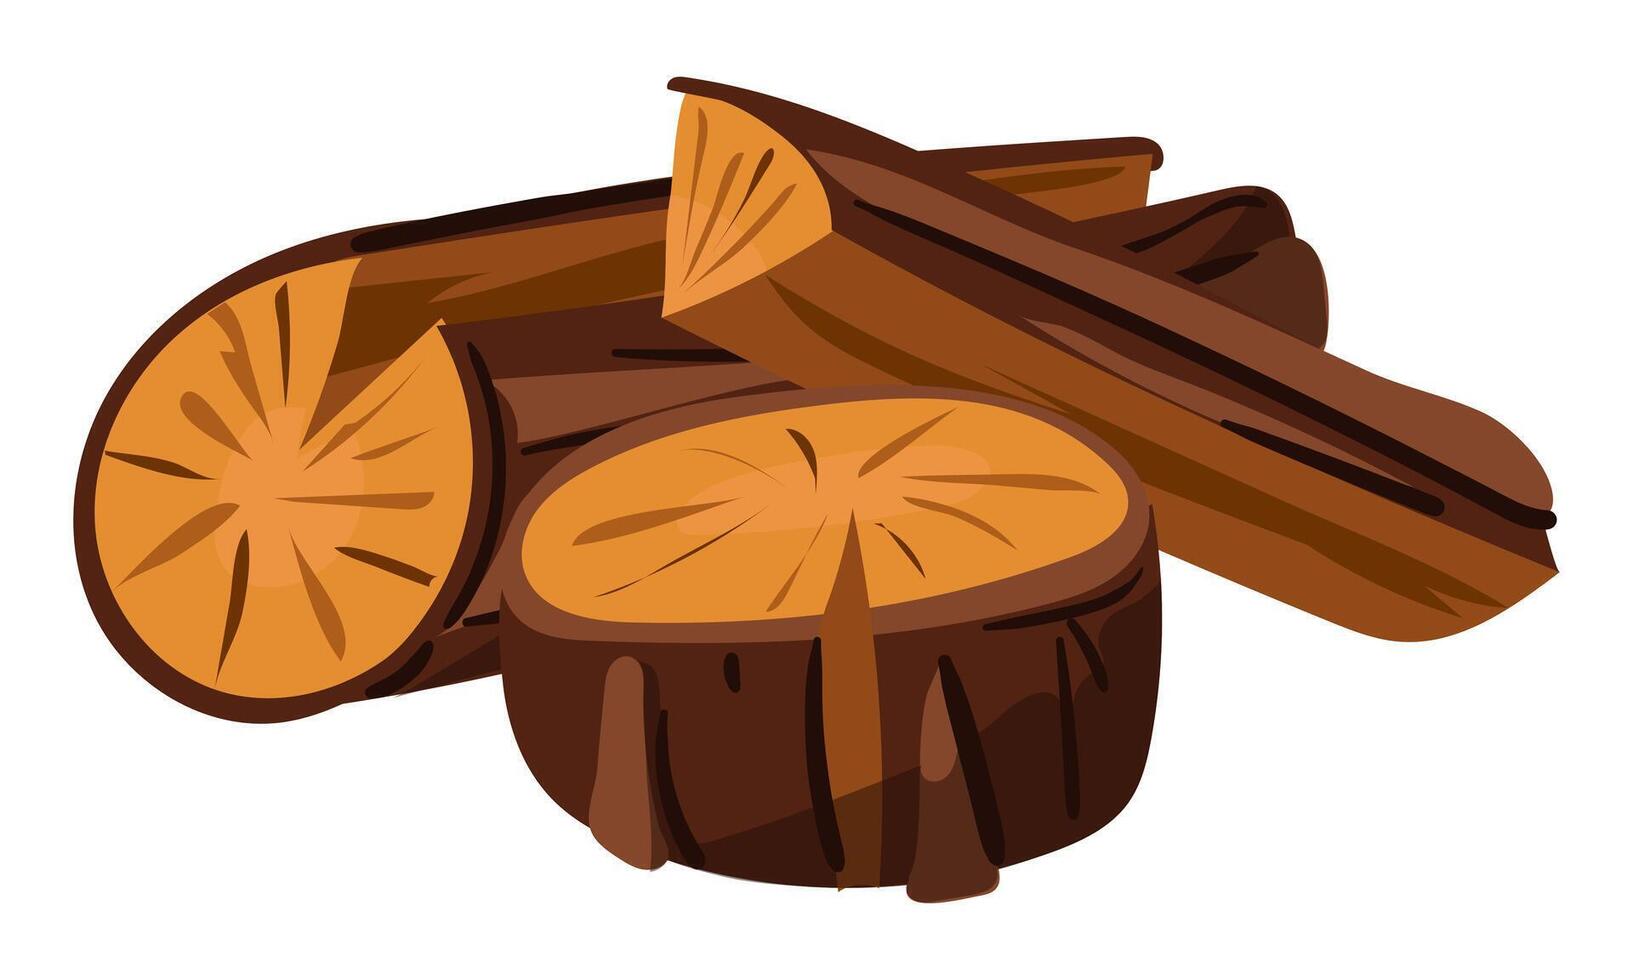 A illustration depicting stacked wooden logs. It can be used for branding, logo creation, or as an icon for timber warehouses, firewood suppliers, or outdoor activities. Isolated tree vector